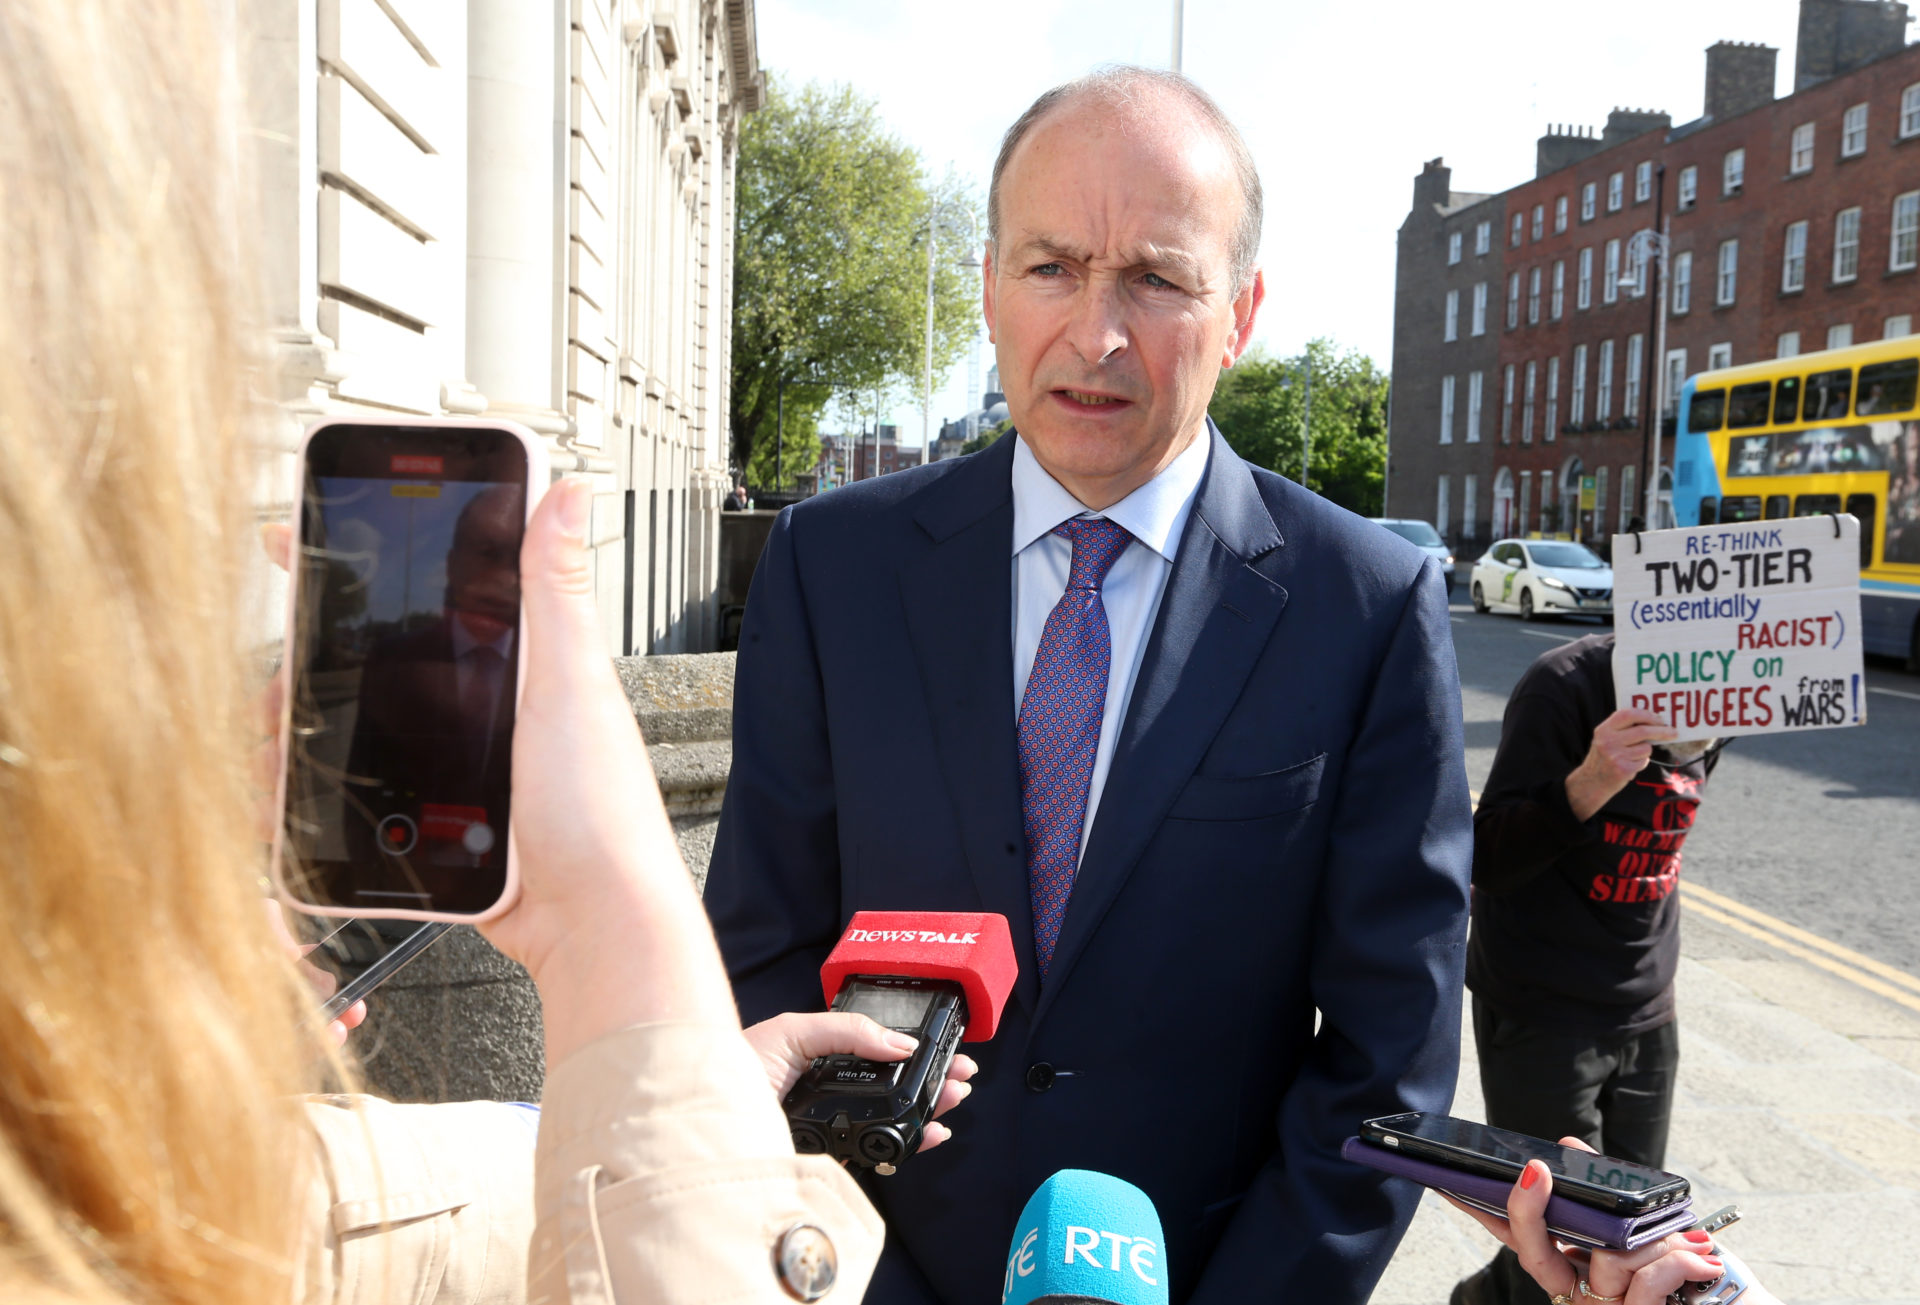 Fianna Fáil leader Micheal Martin on his way into Government Buildings